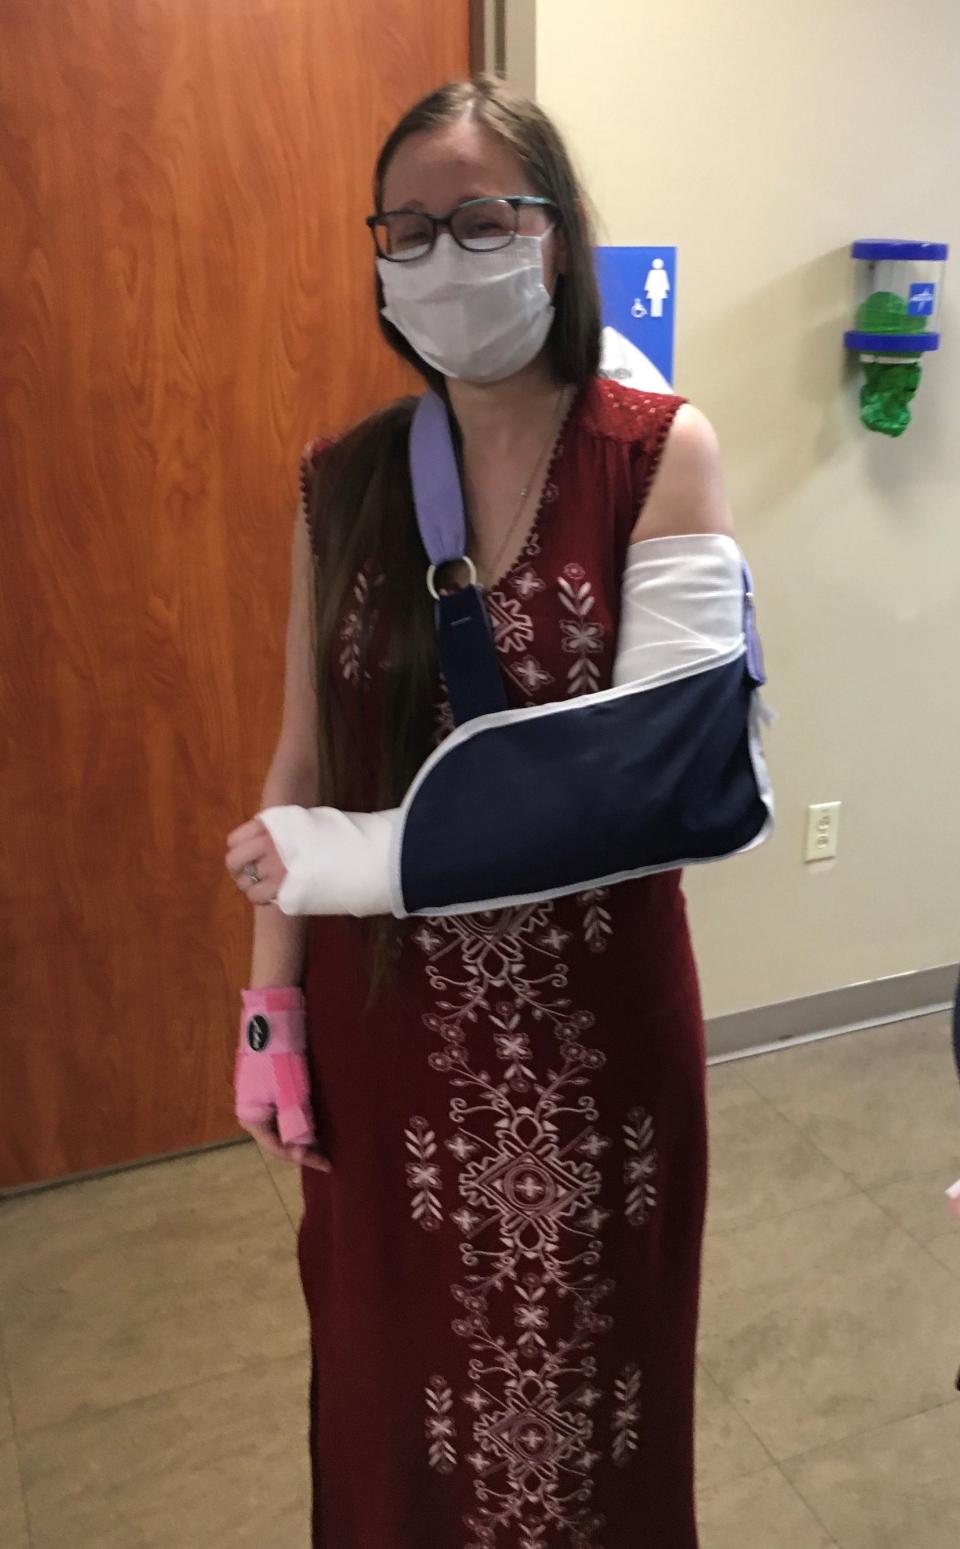 Kindergarten teacher Rachel Davis at Ascension Saint Thomas Midtown hospital after getting a cast on her left arm May 11, 2022, the day she tackled an intruder in her school and broke her left arm